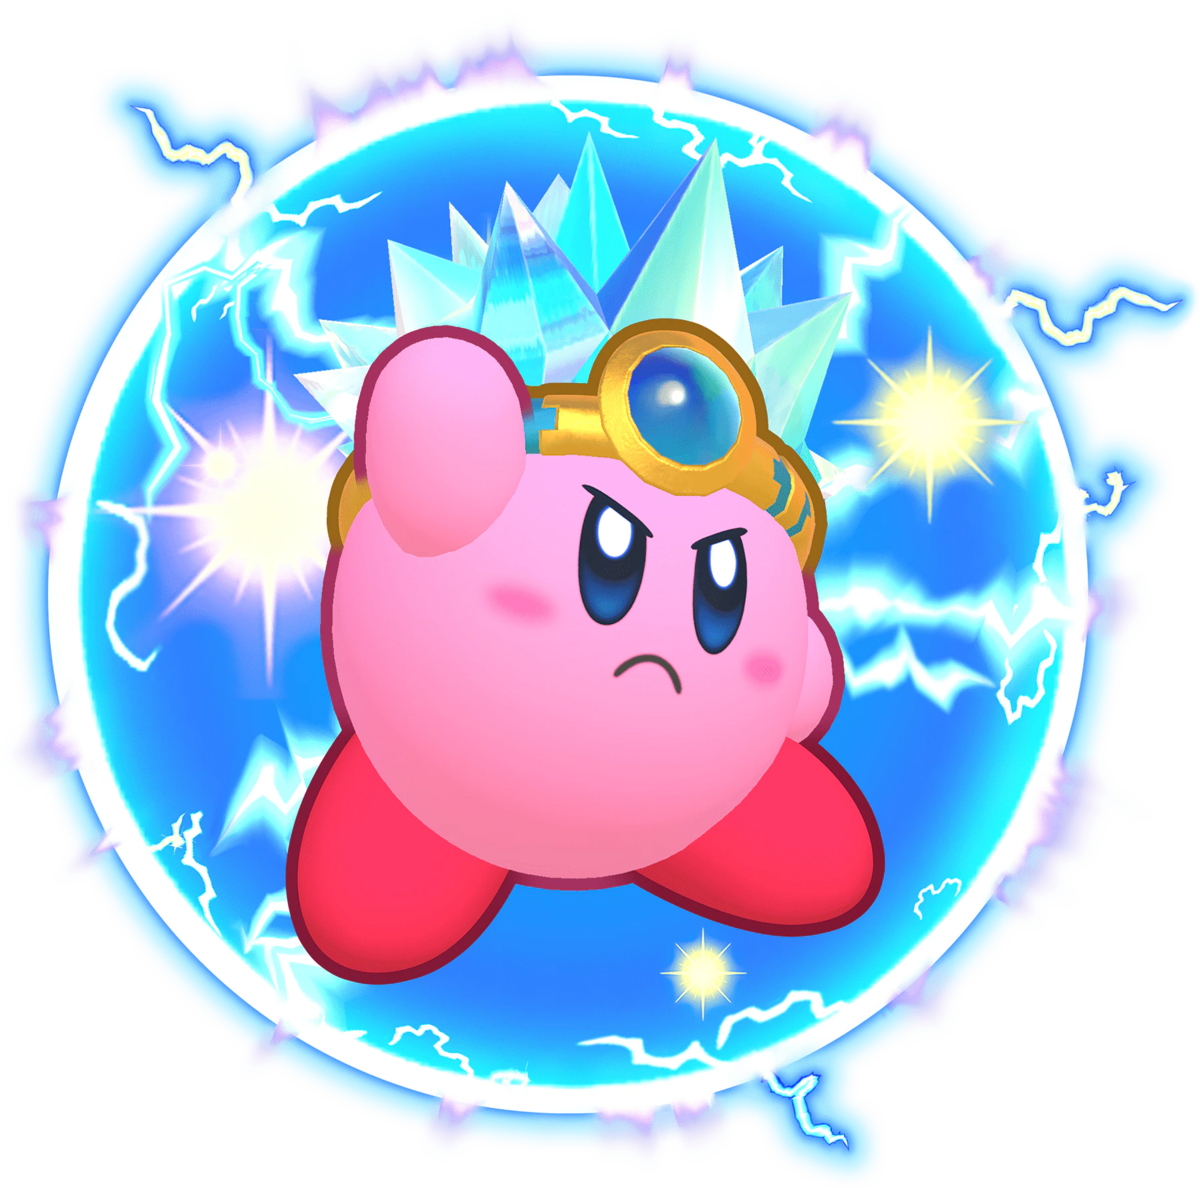 Kirby's Dream Land 2 (Game) - Giant Bomb